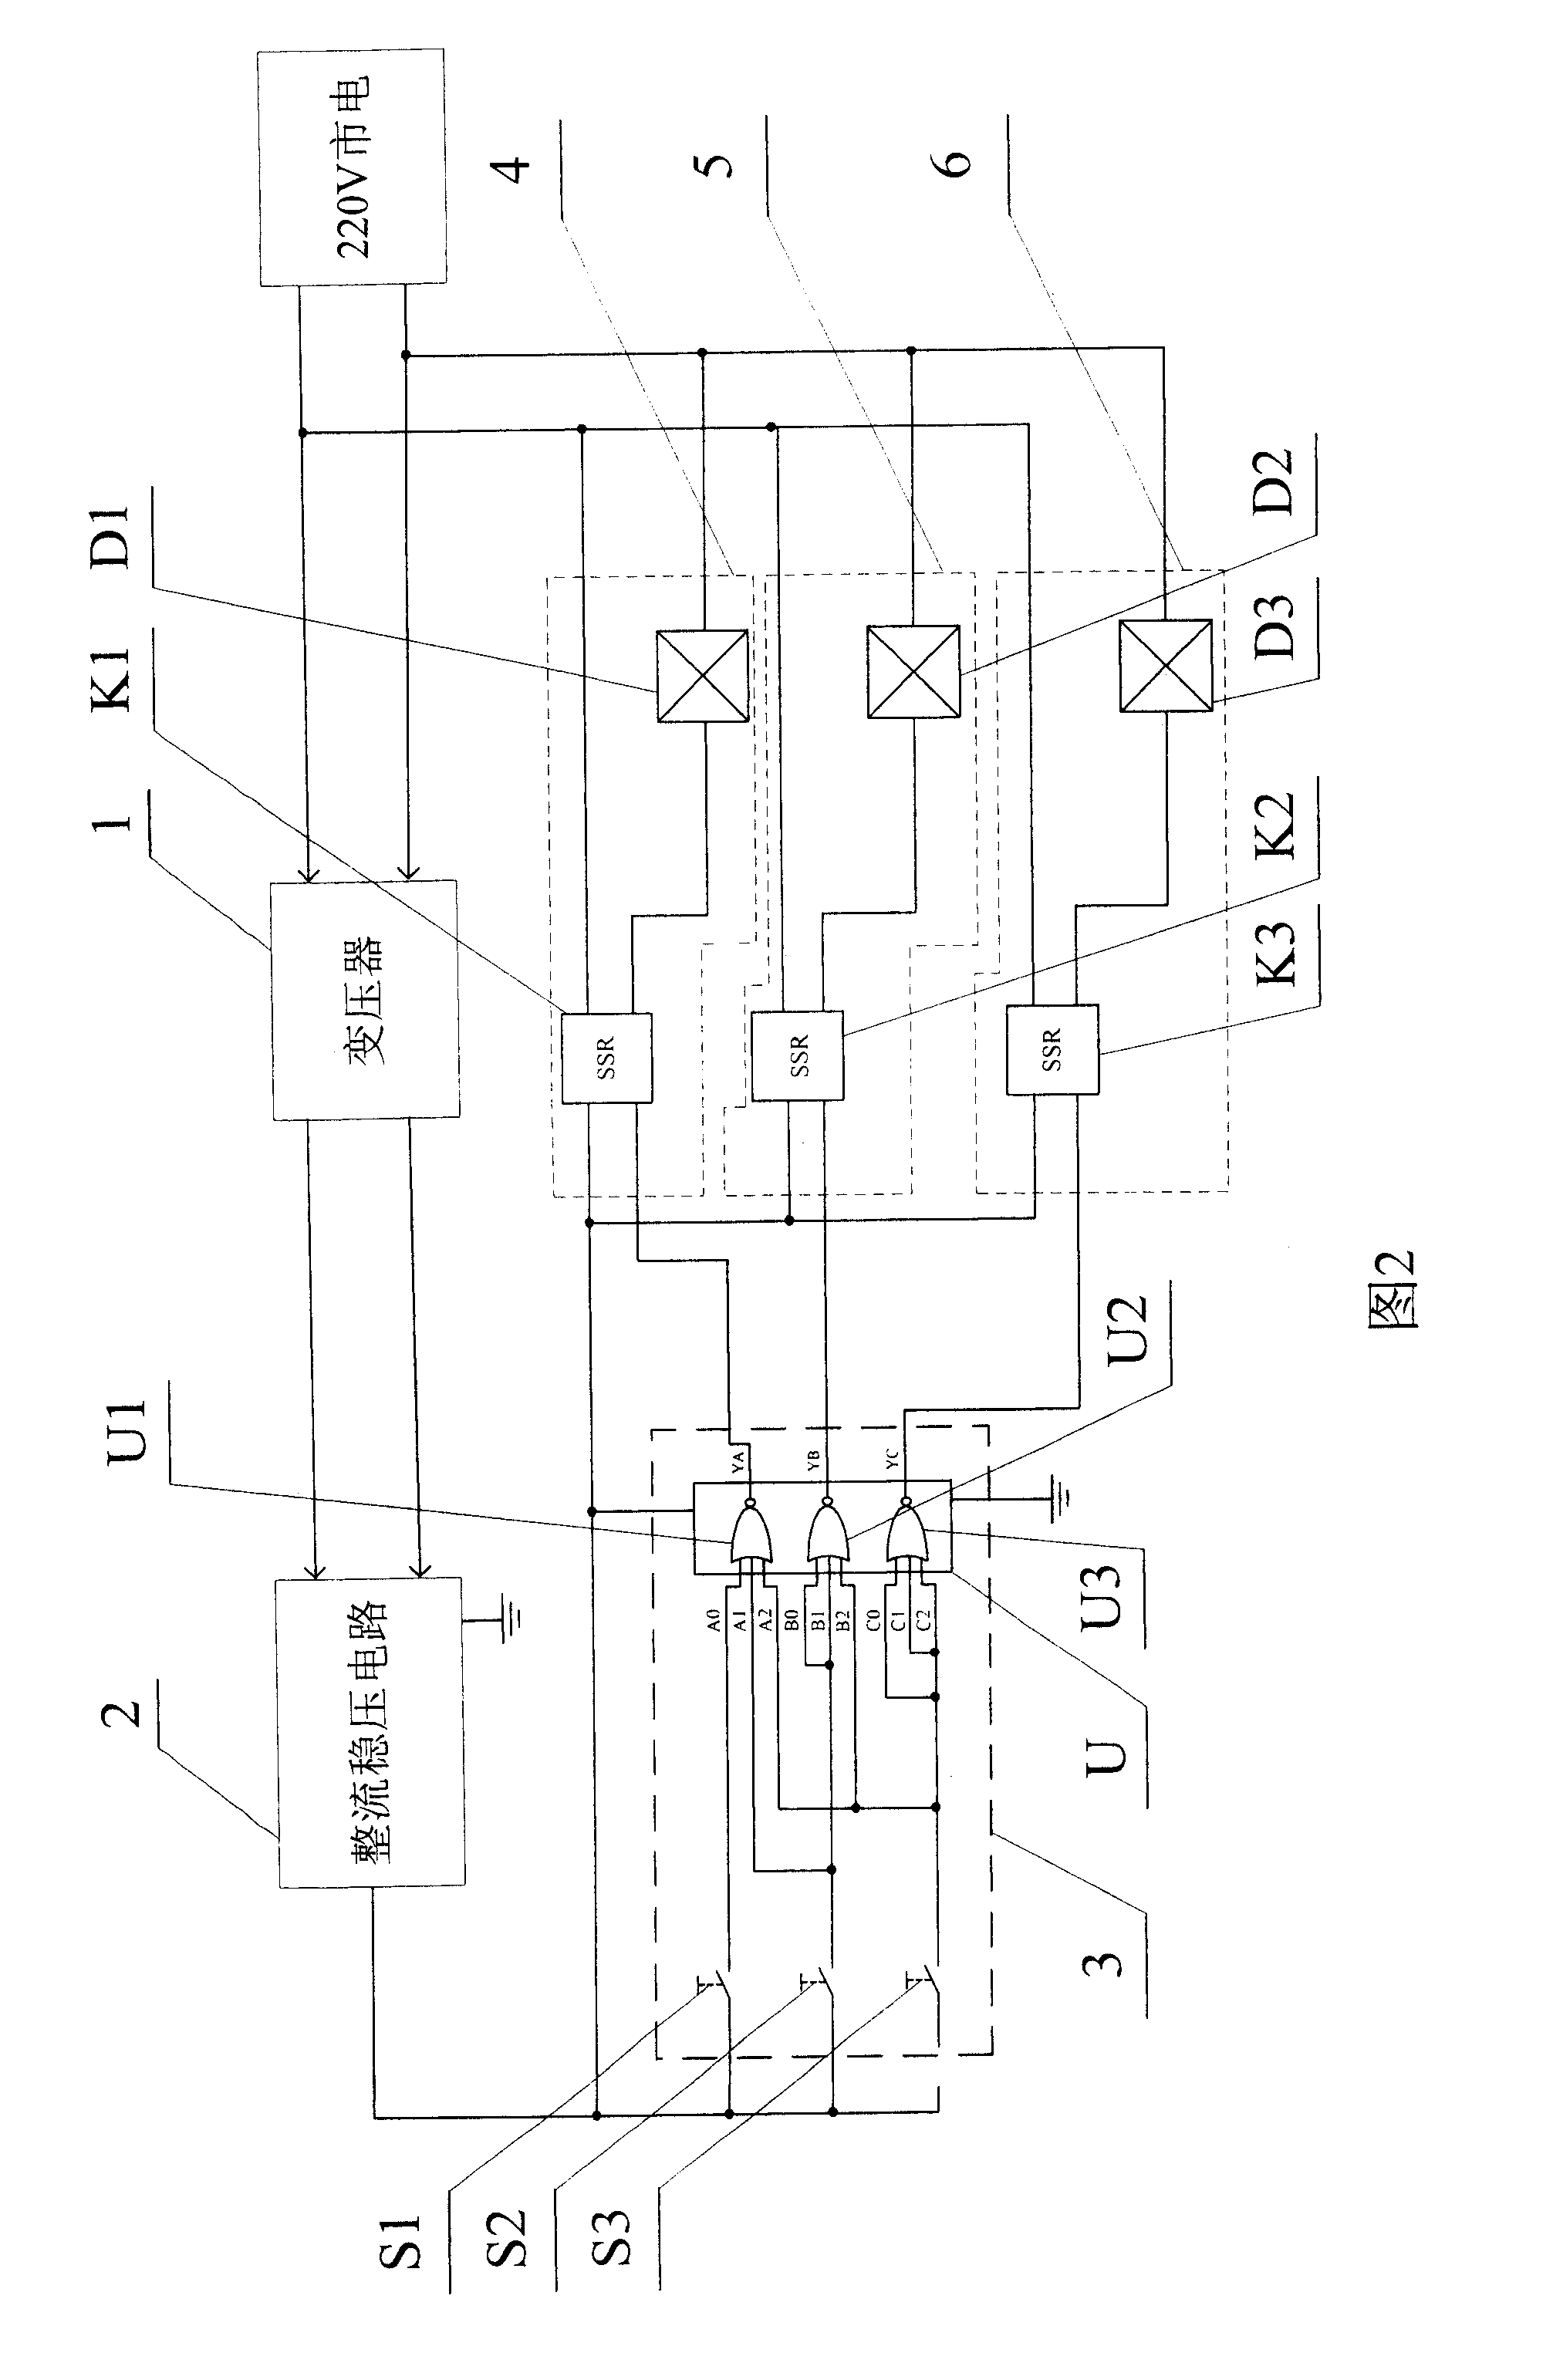 Digital type multiple gears synchronous flow-control system